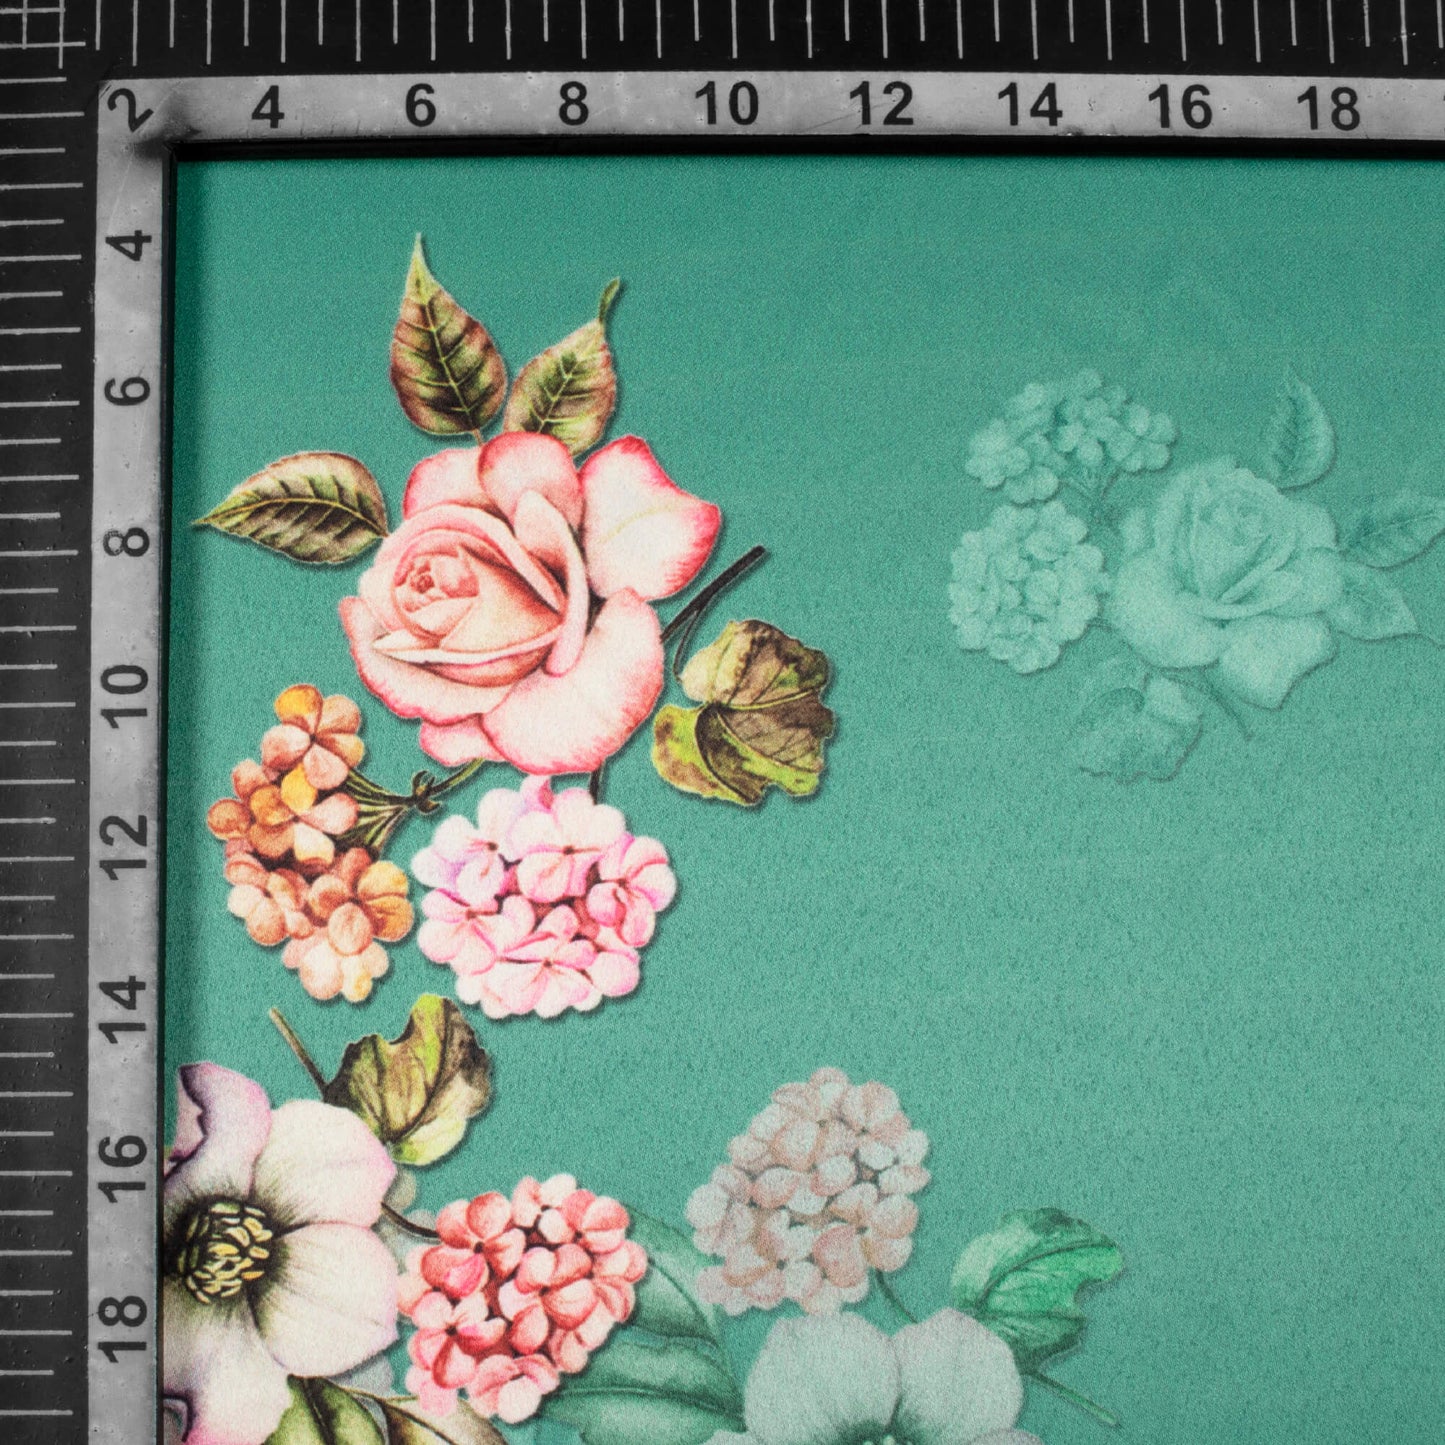 Teal Green And Pale Pink Floral Pattern Digital Print Charmeuse Satin Fabric (Width 58 Inches)